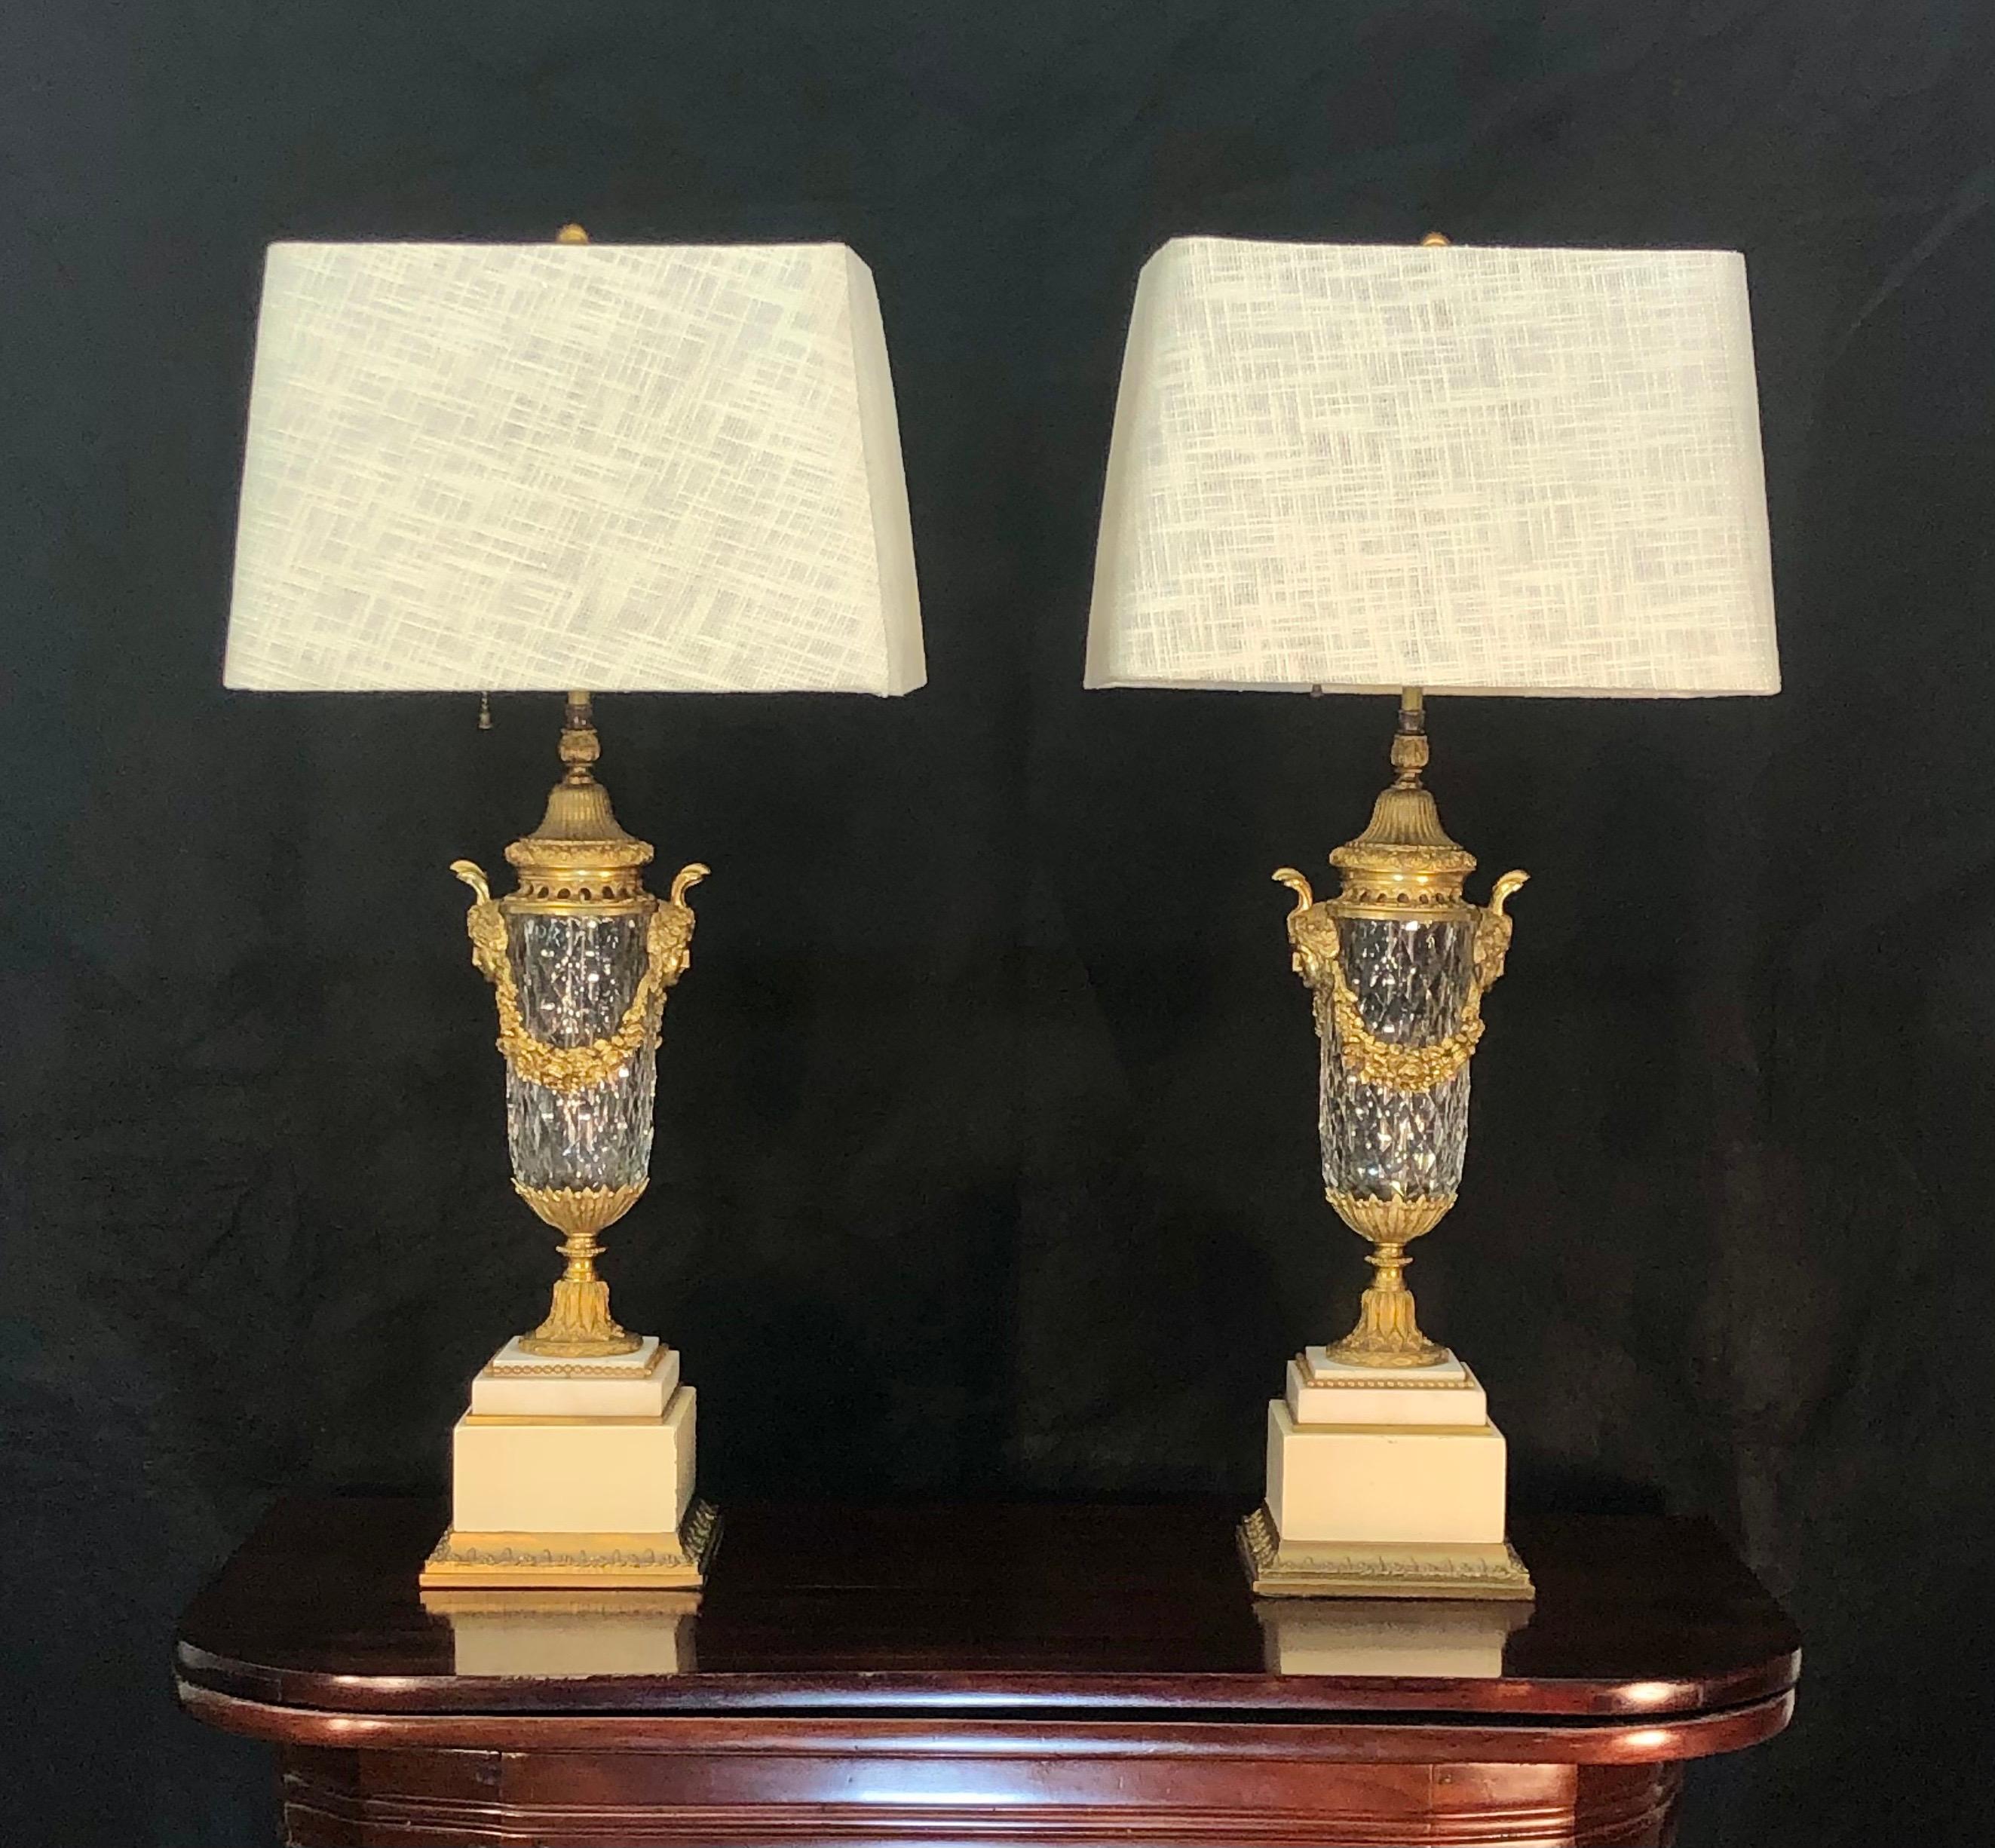 Magnificent pair of French Louis XIV style bronze doré mounted and crystal urns converted to Lamps. The hand-cut crystal urn have a cut diamond pattern with bronze doré mounts on top of marble bases. The original urn was later mounted to a paint